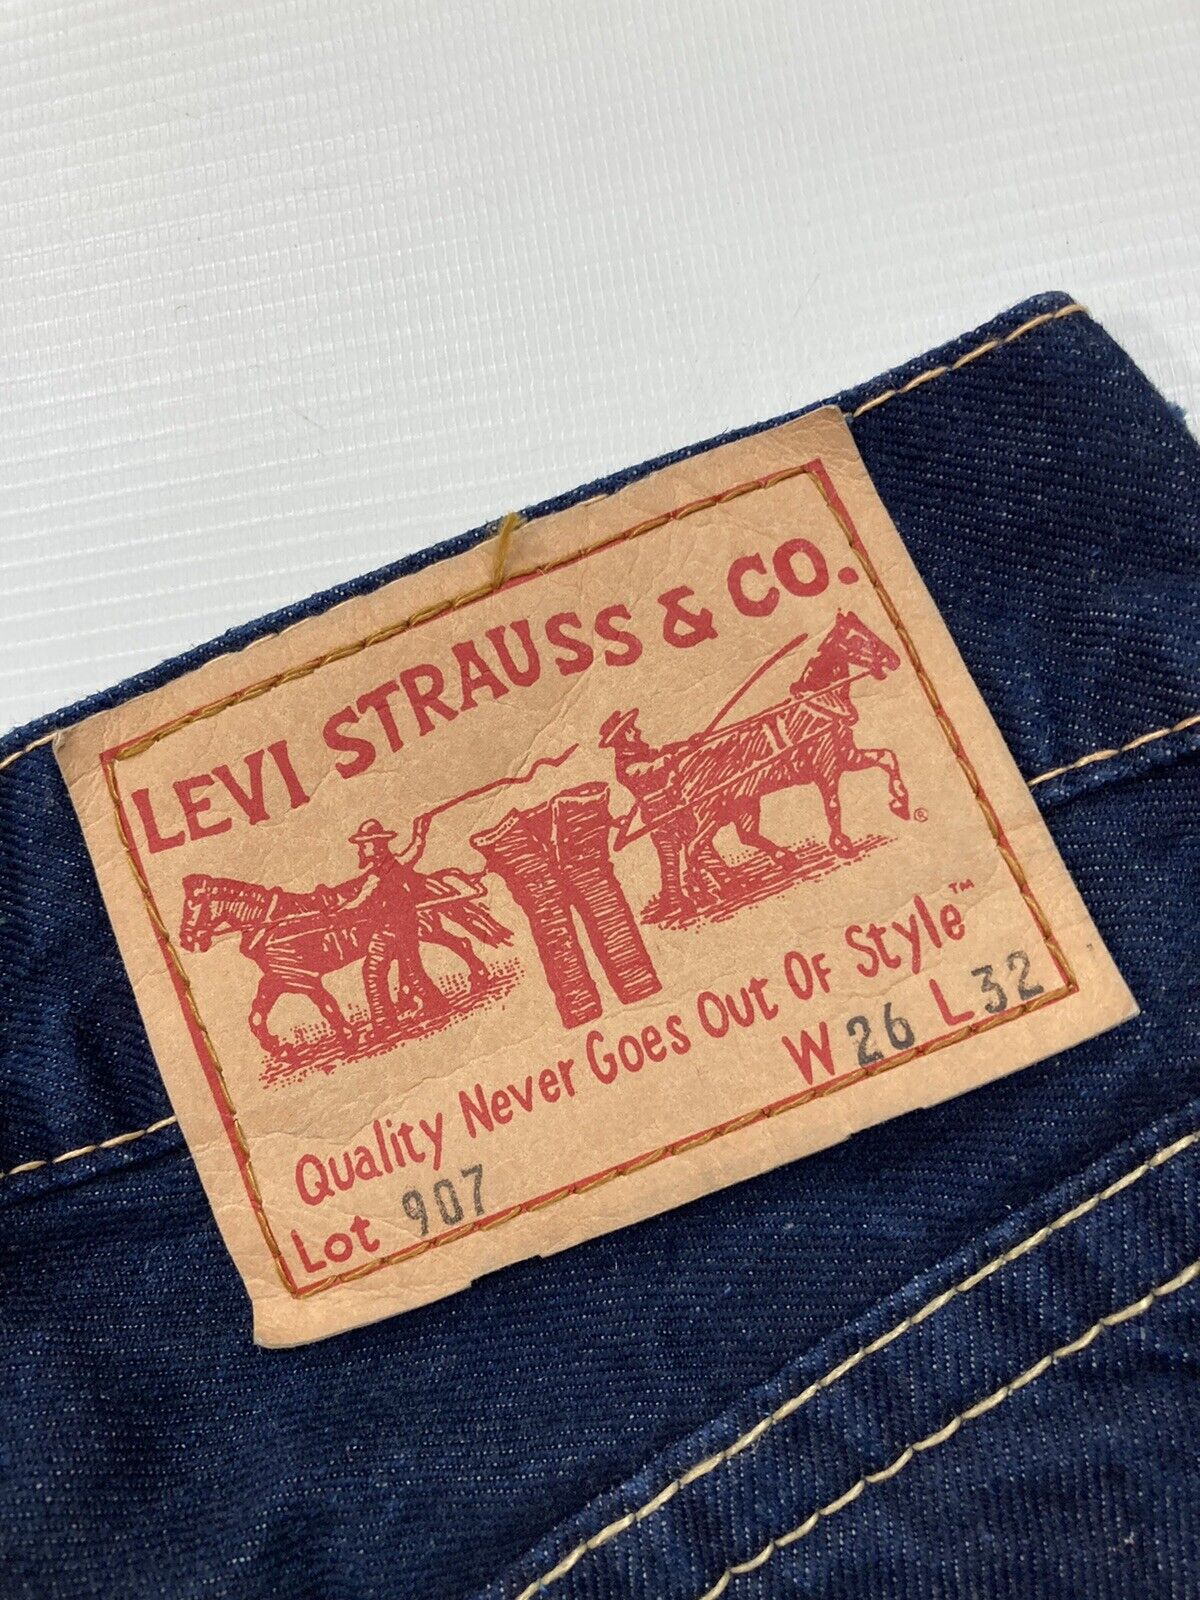 LEVI 907 BOOTCUT Jeans - W26 L32 - Navy - Great Condition - Women’s | eBay